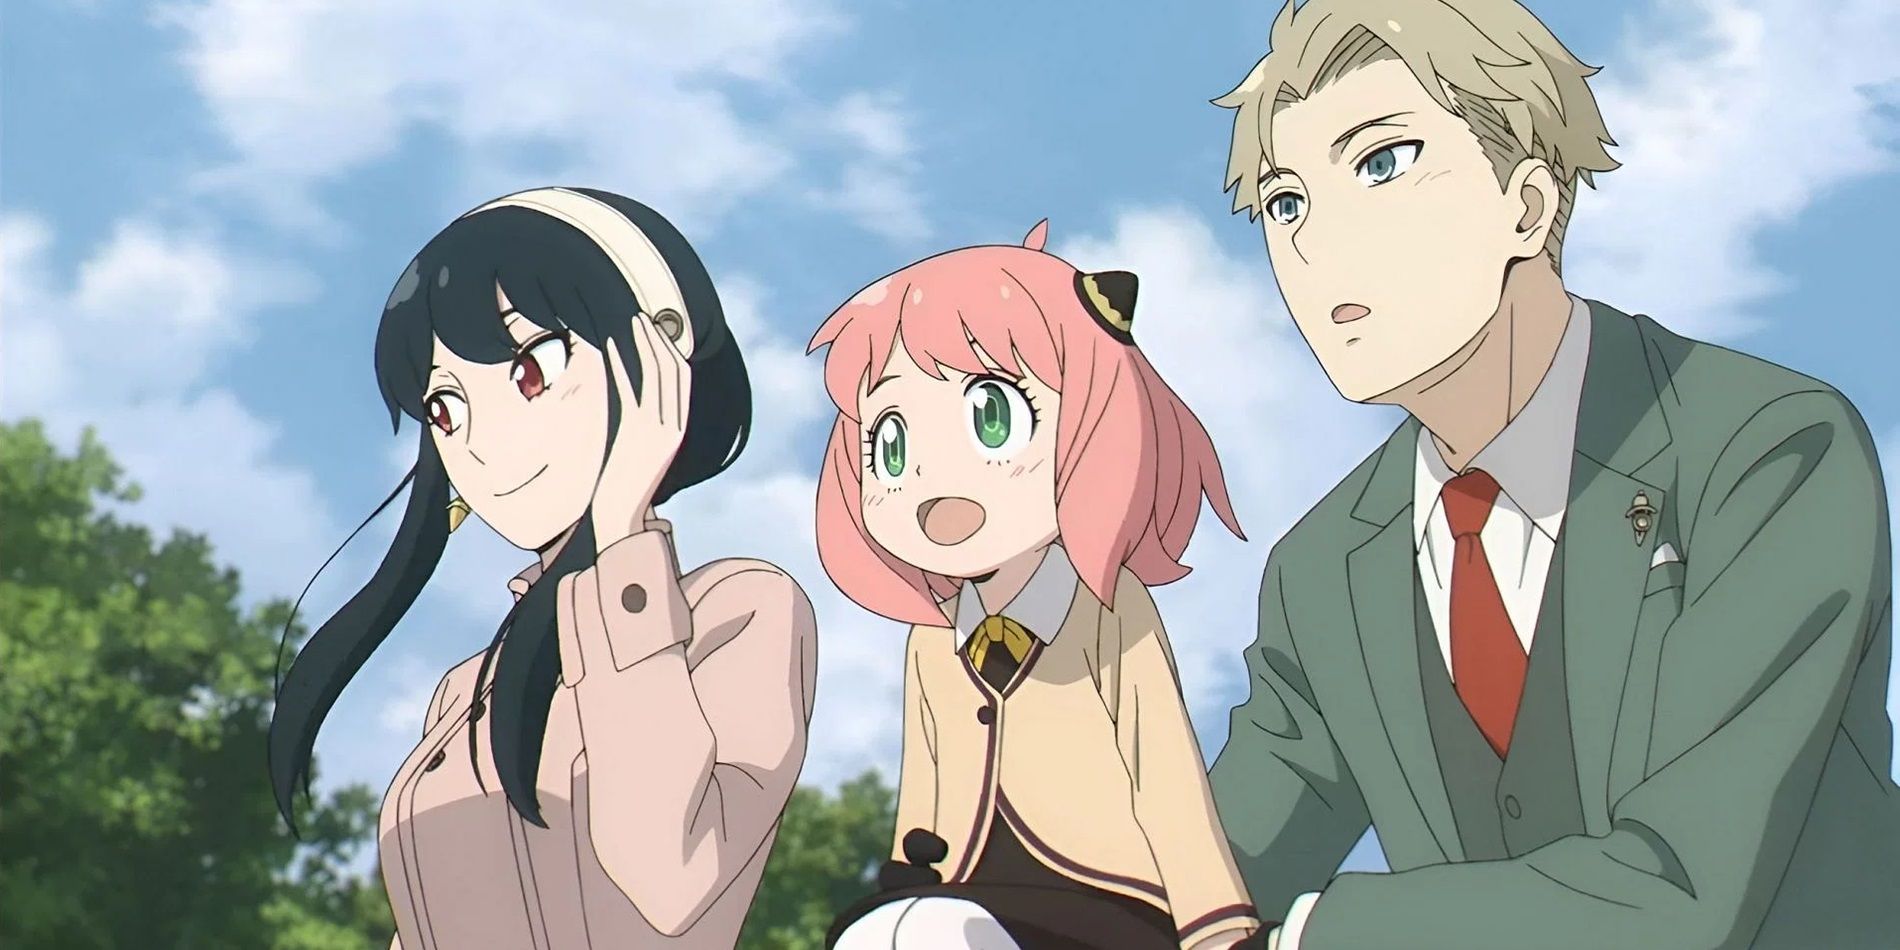 Yor, Anya and Loid/Twilight looking into the distance in Spy x Family